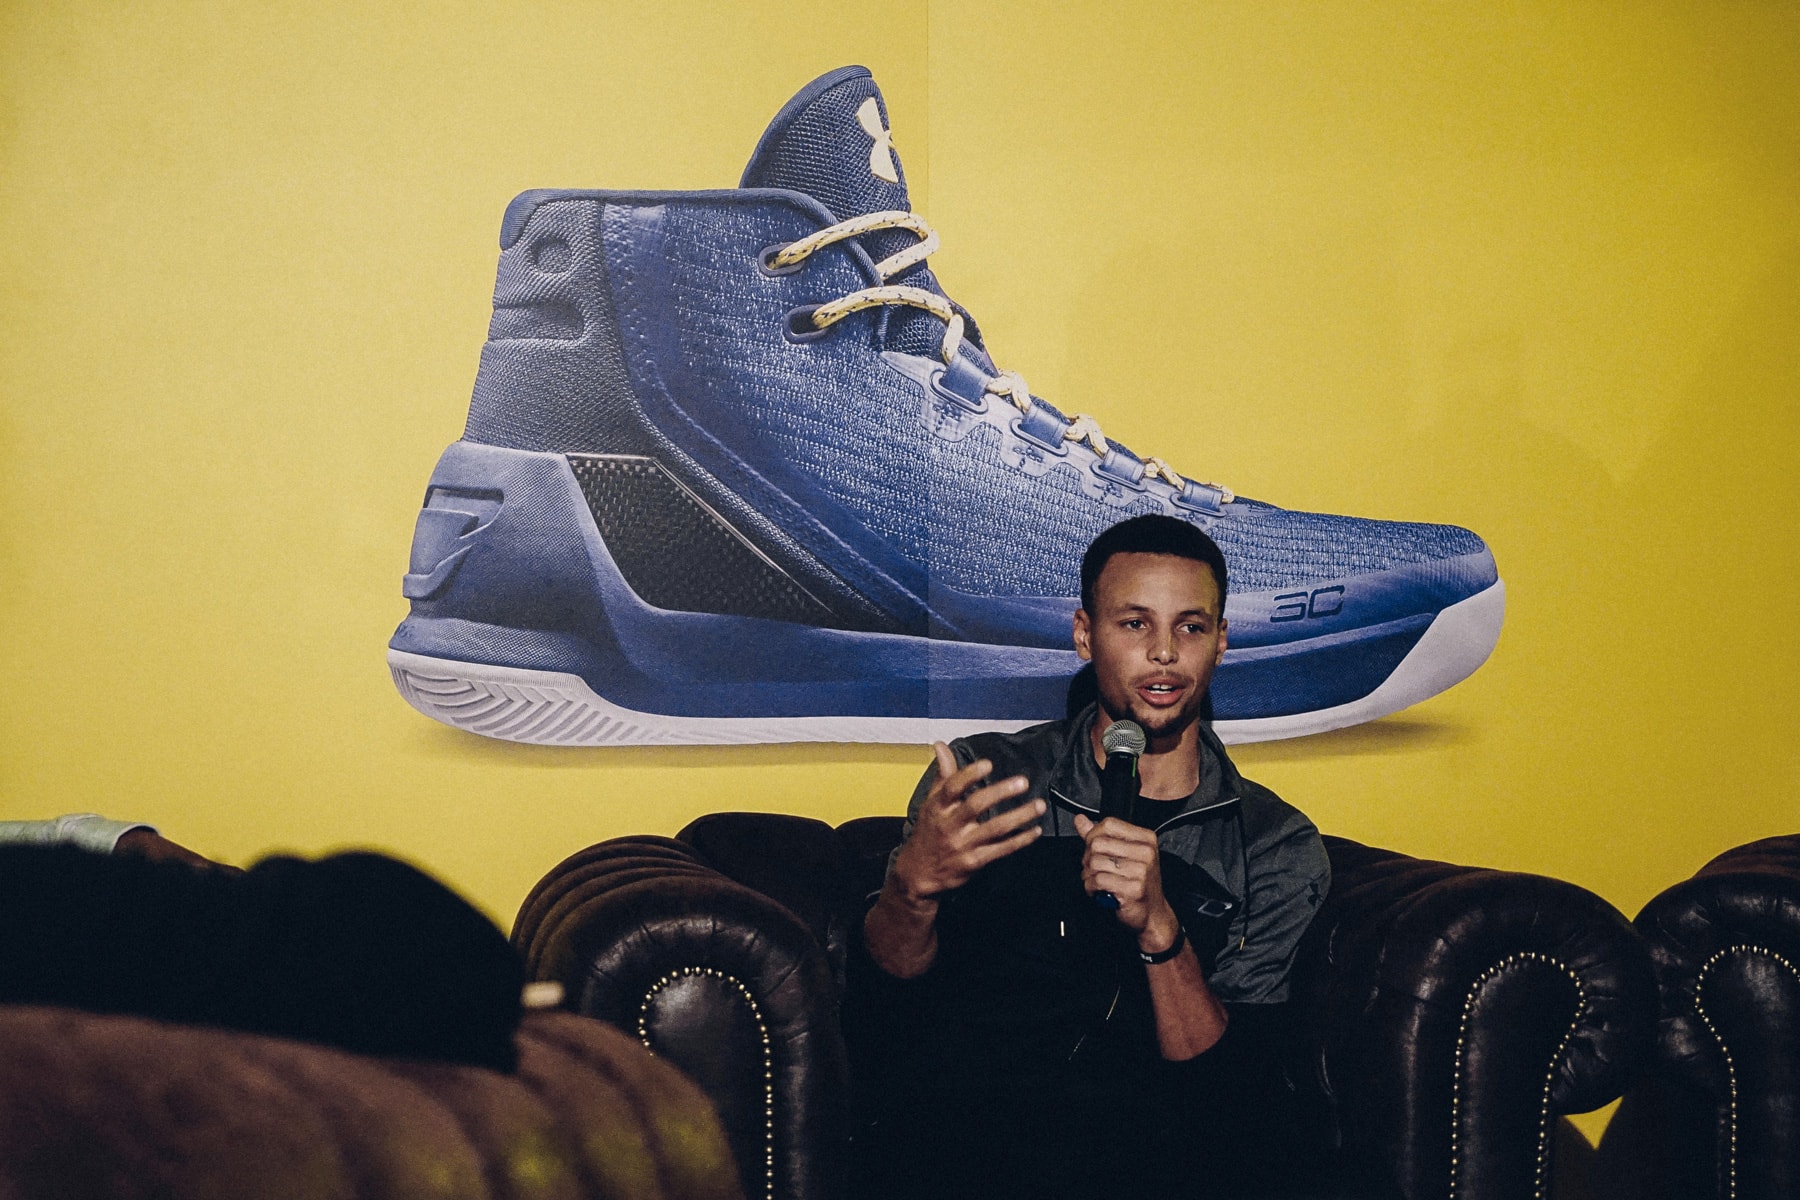 Stephen Curry unveils Chinese New Year-inspired Curry 4's